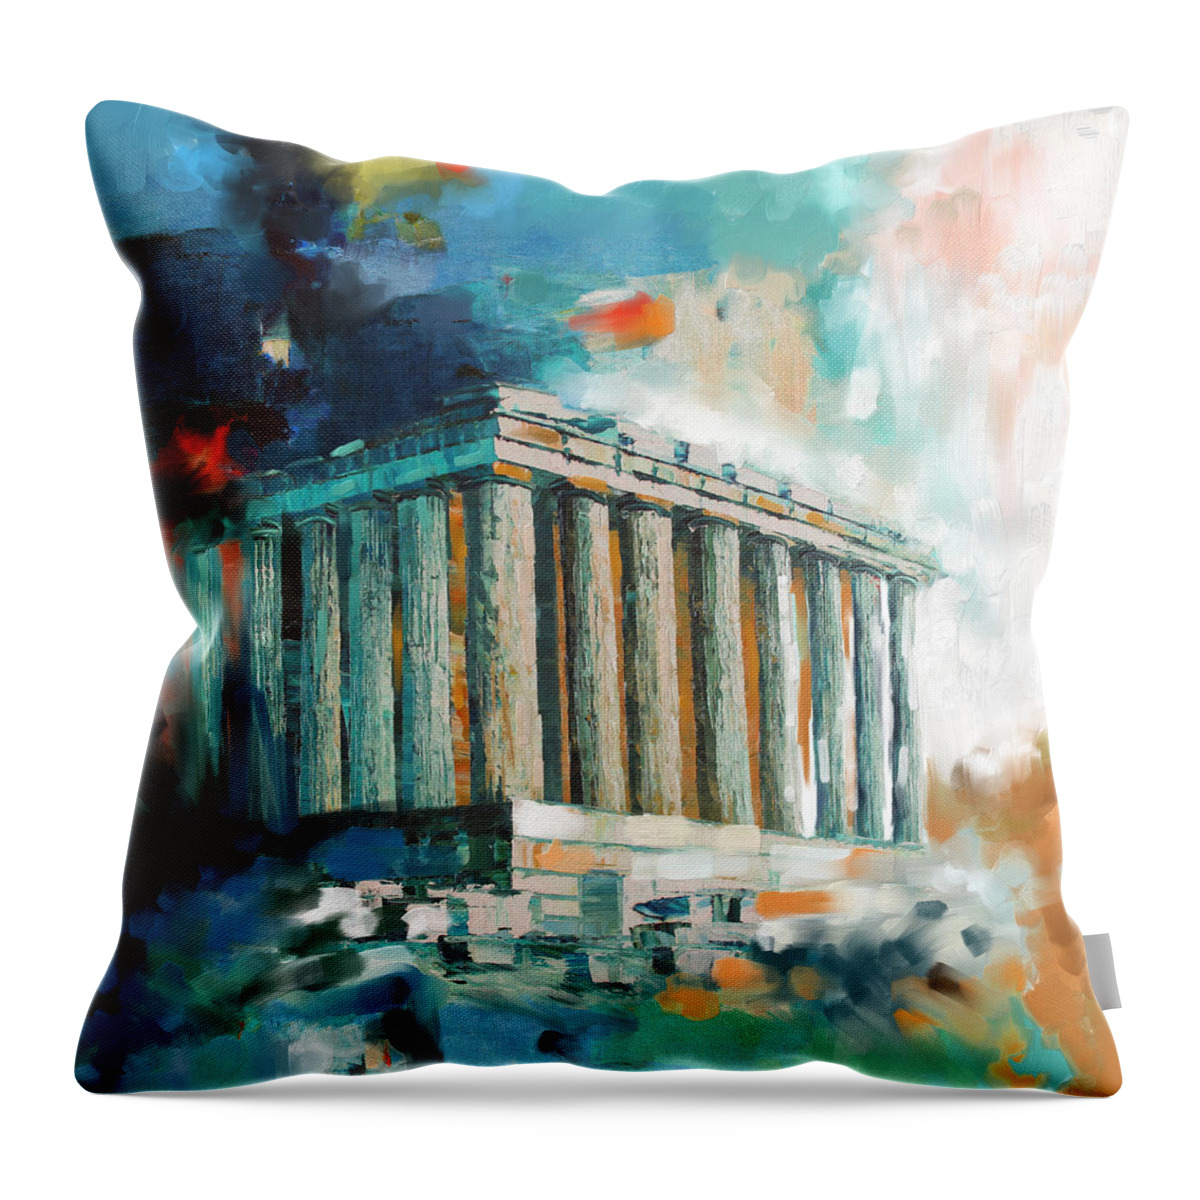 Temple Acropolis Throw Pillow featuring the painting Greece Temple Acropolis 169 2 by Mawra Tahreem